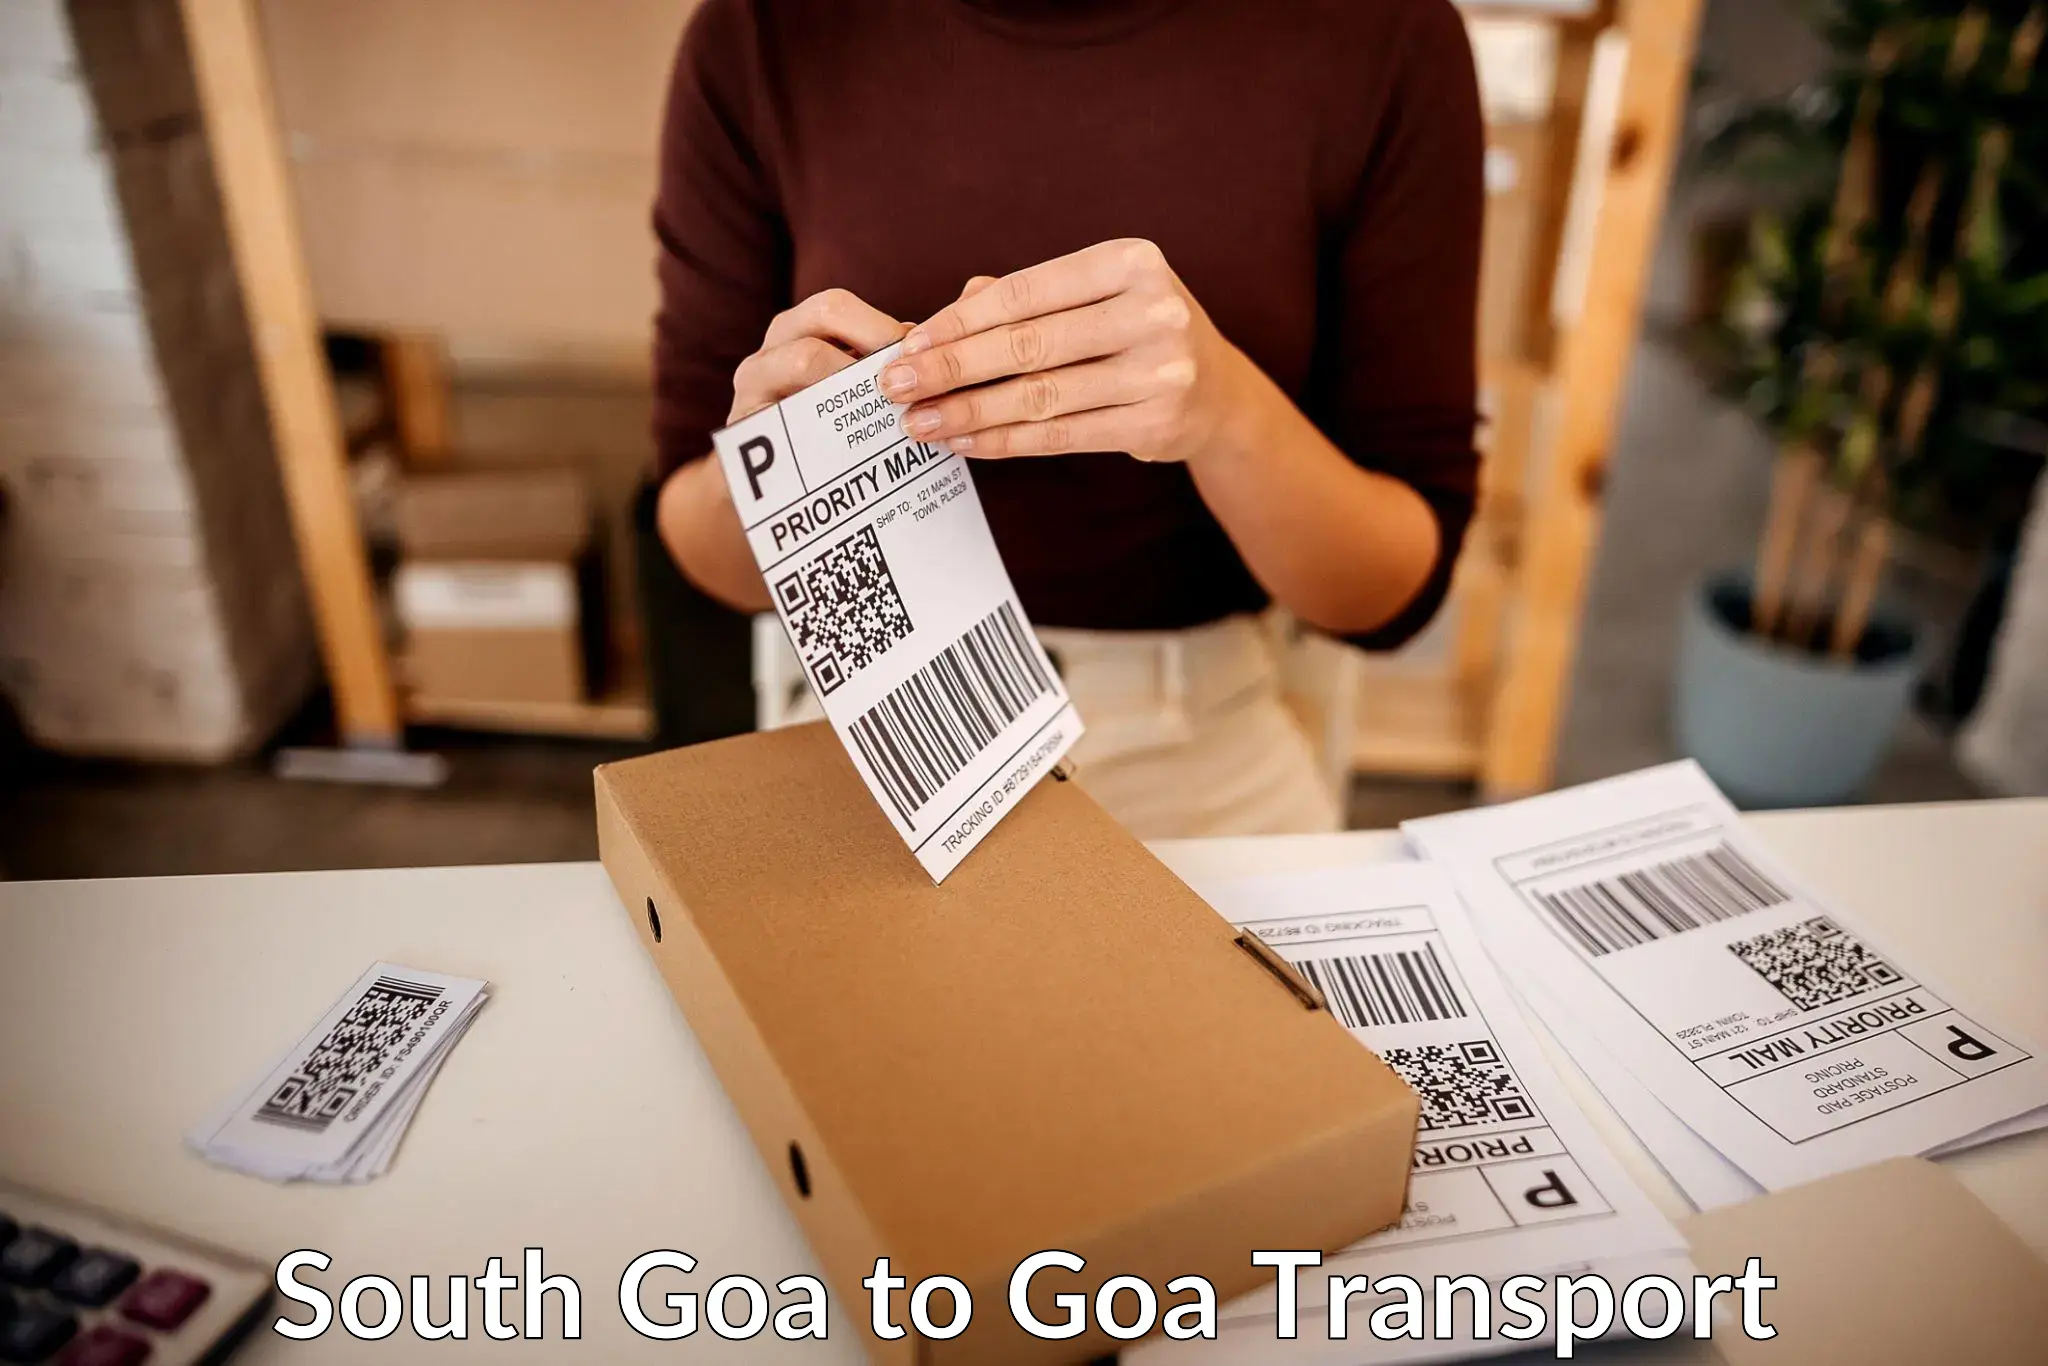 Online transport booking in South Goa to South Goa